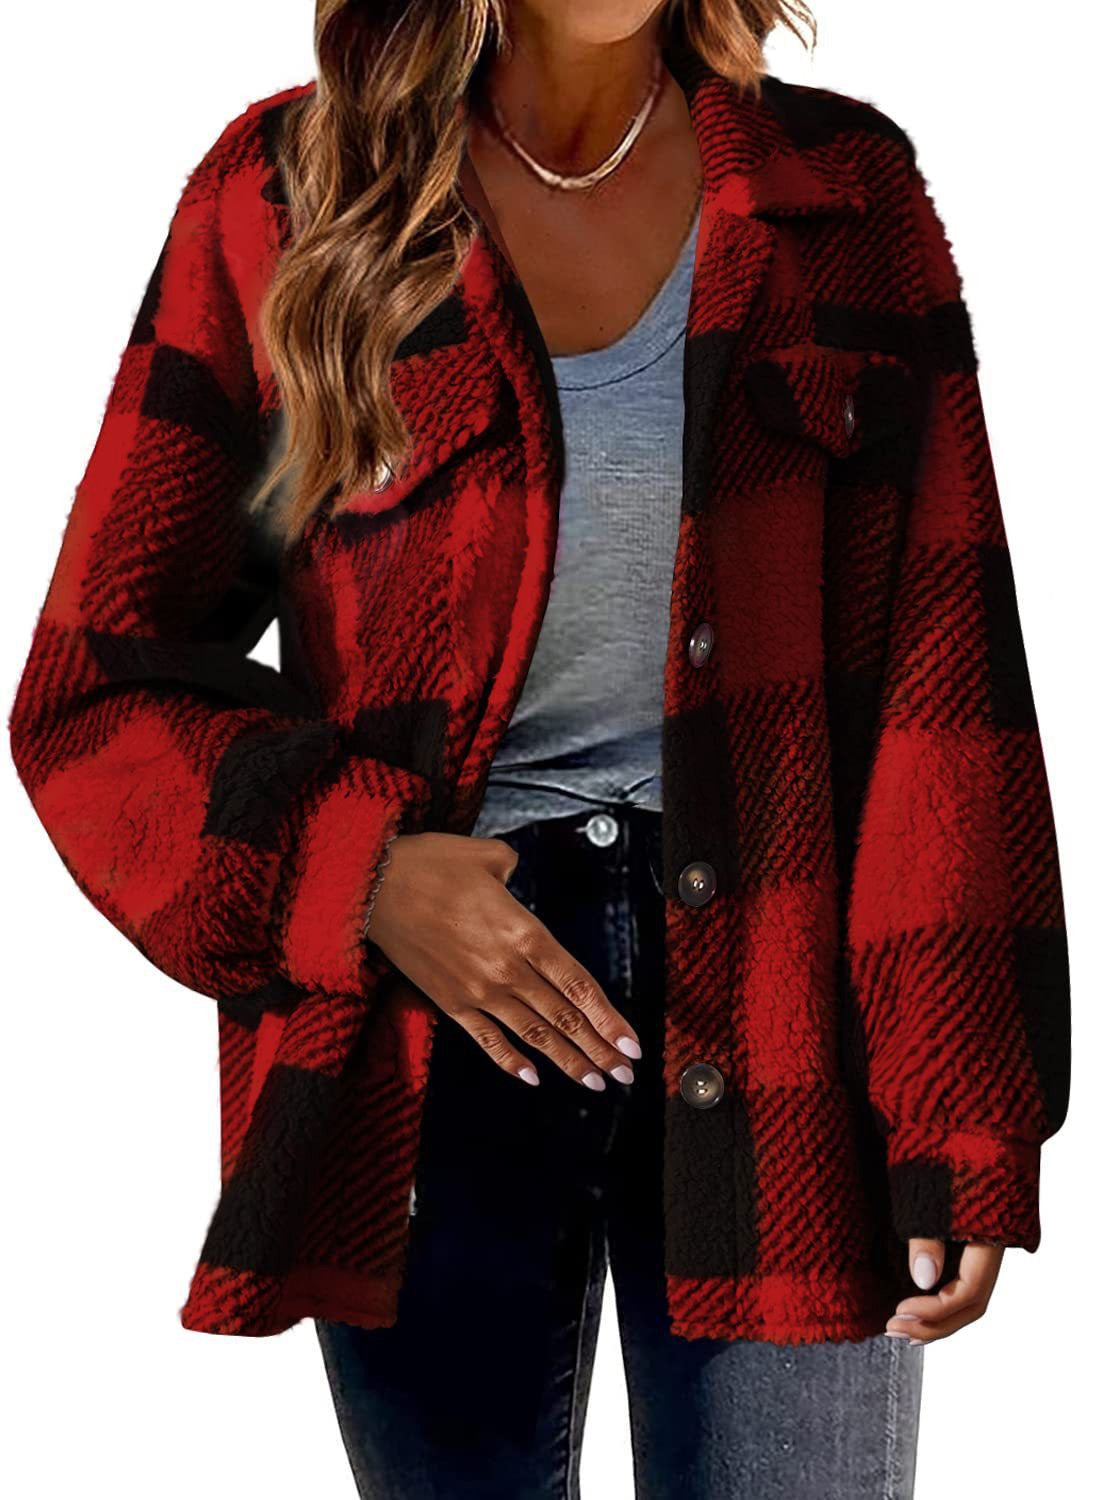 Turndown Collar Plaid Jacket With Pockets Single Breasted Button Down Woolen Jacket Autumn And Winter Clothes For Women - Fashioinista